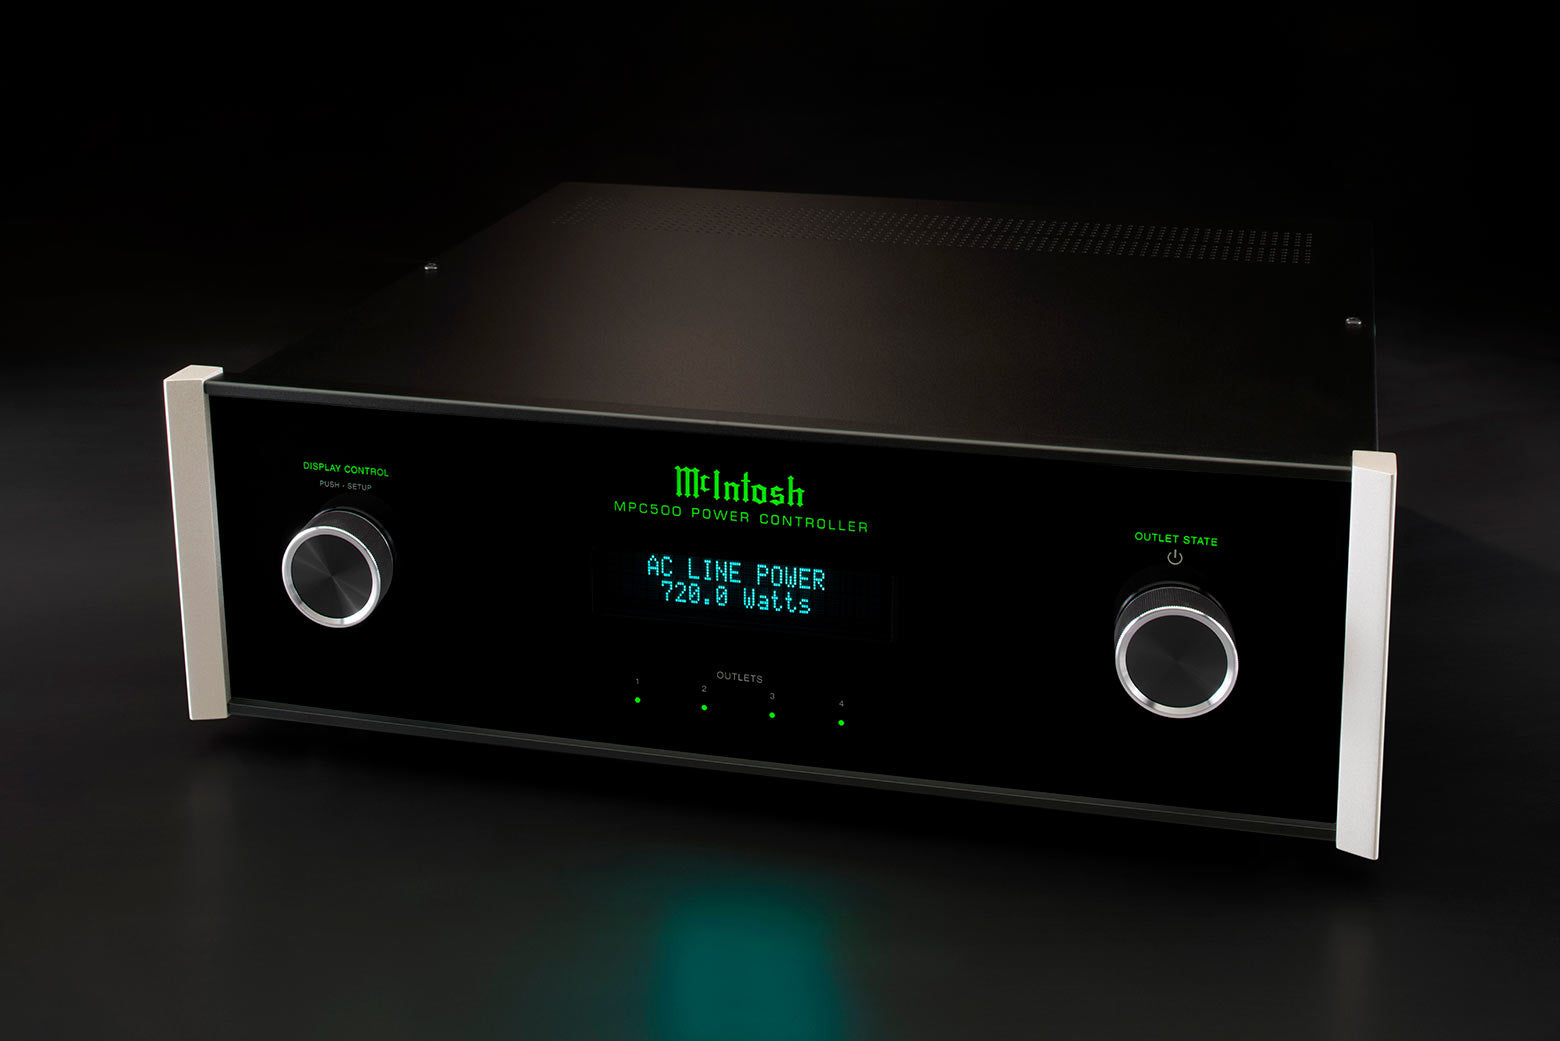 McIntosh MPC500 Power Controller (In-Store Purchase Only)